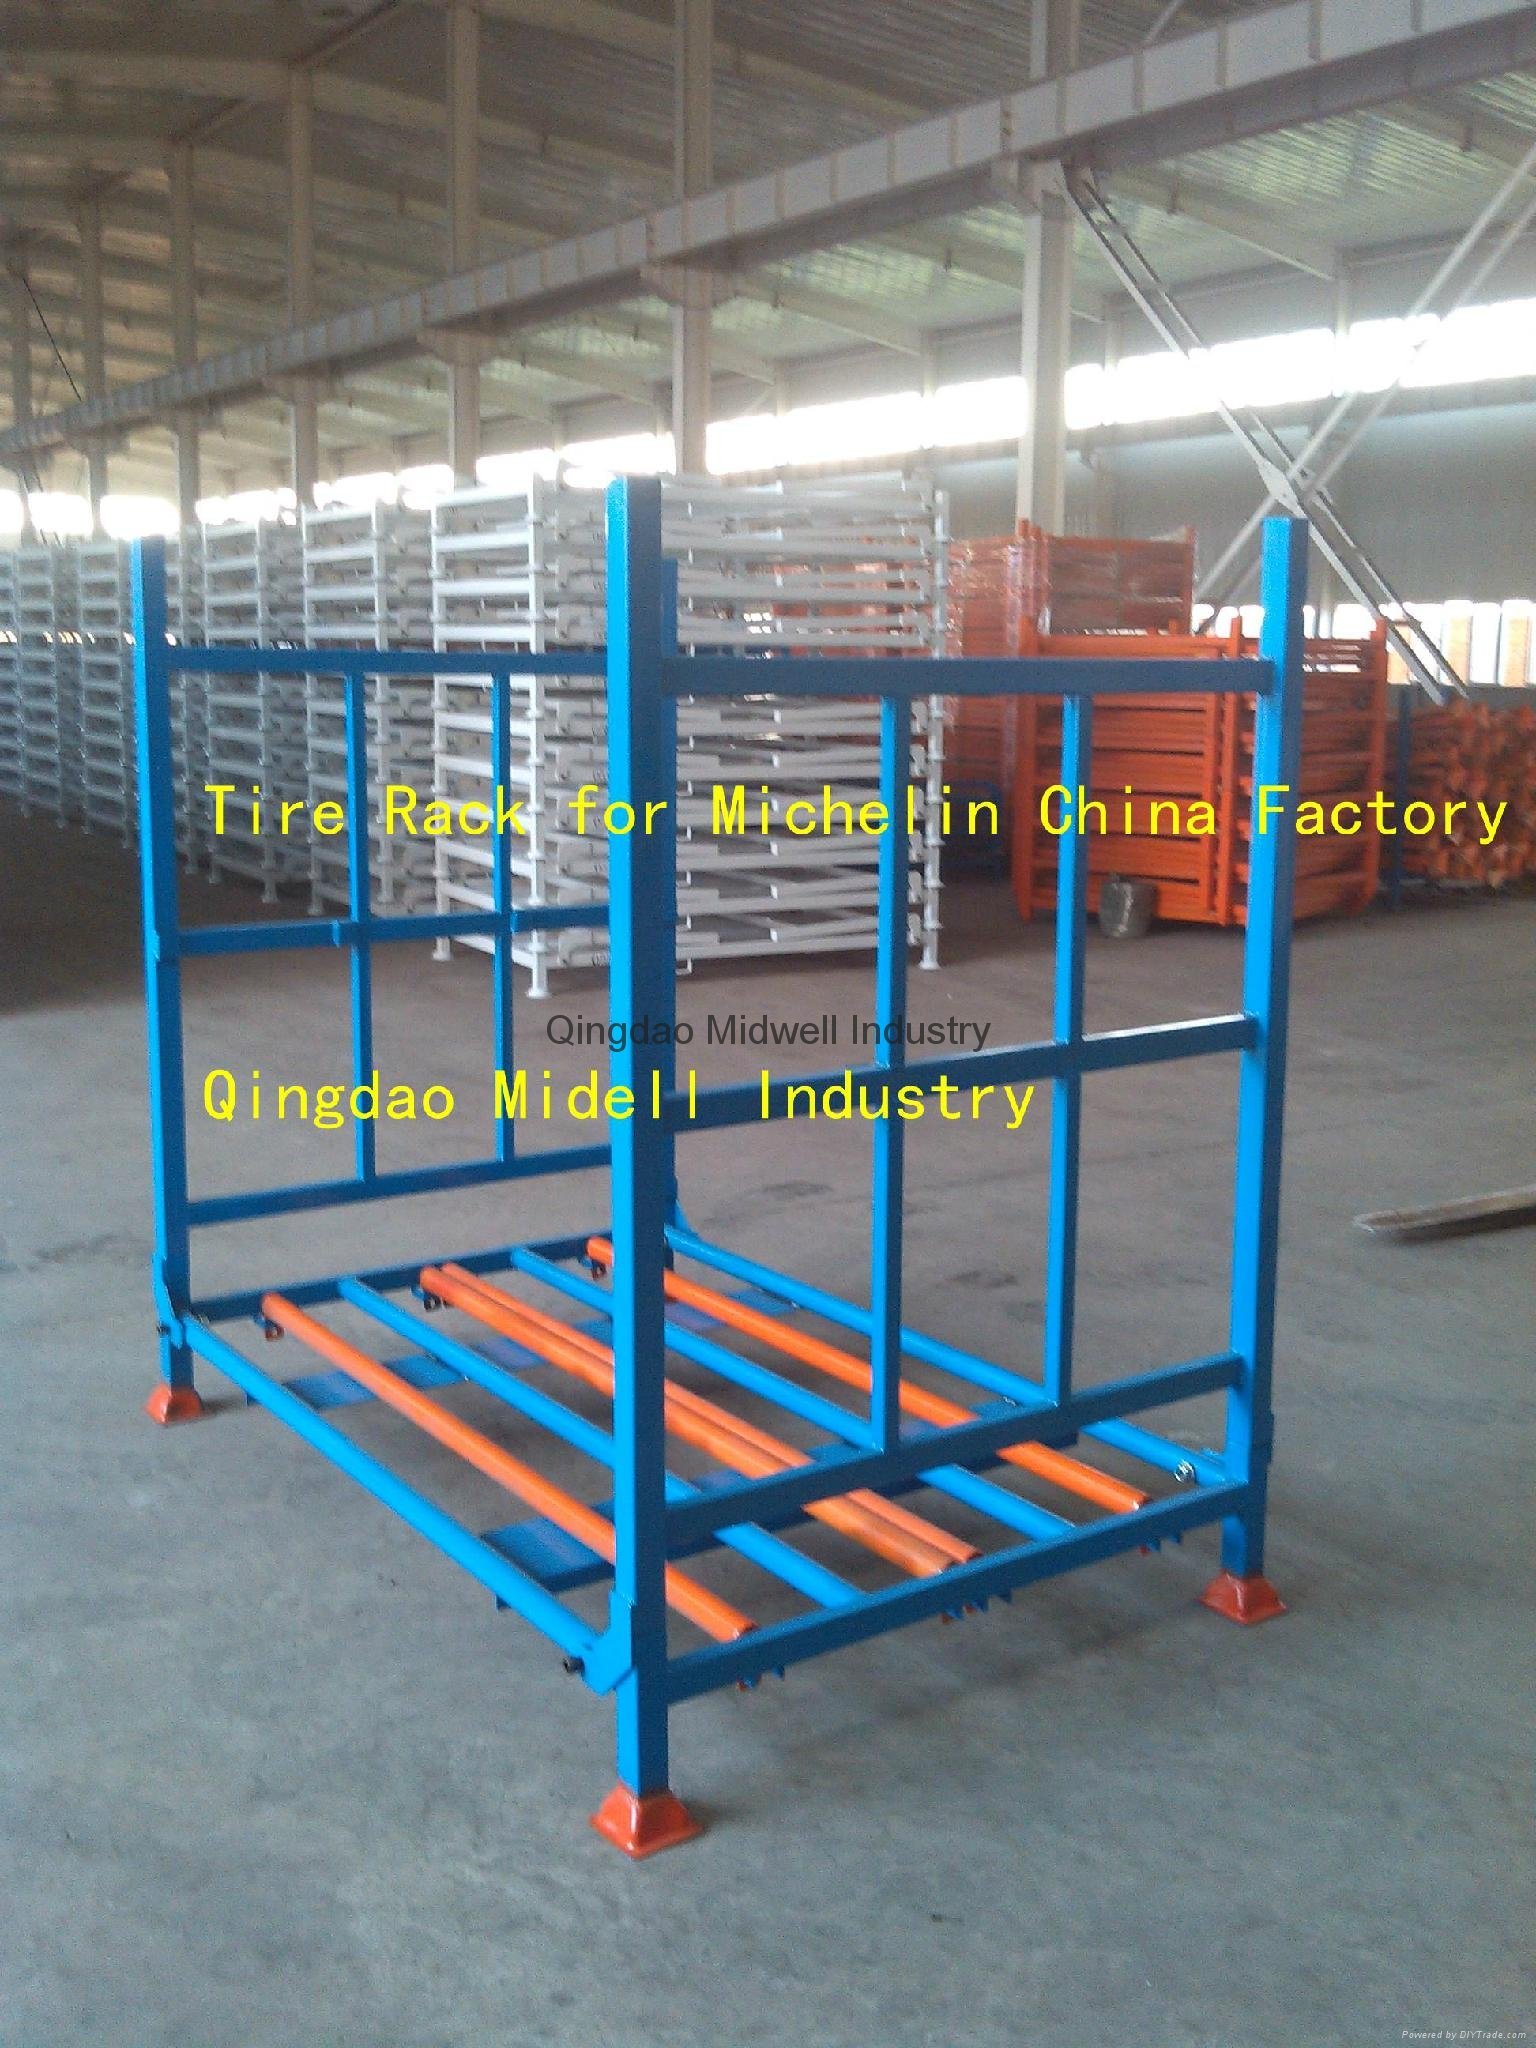 Tire Stacking Racks for Michelin Tyre